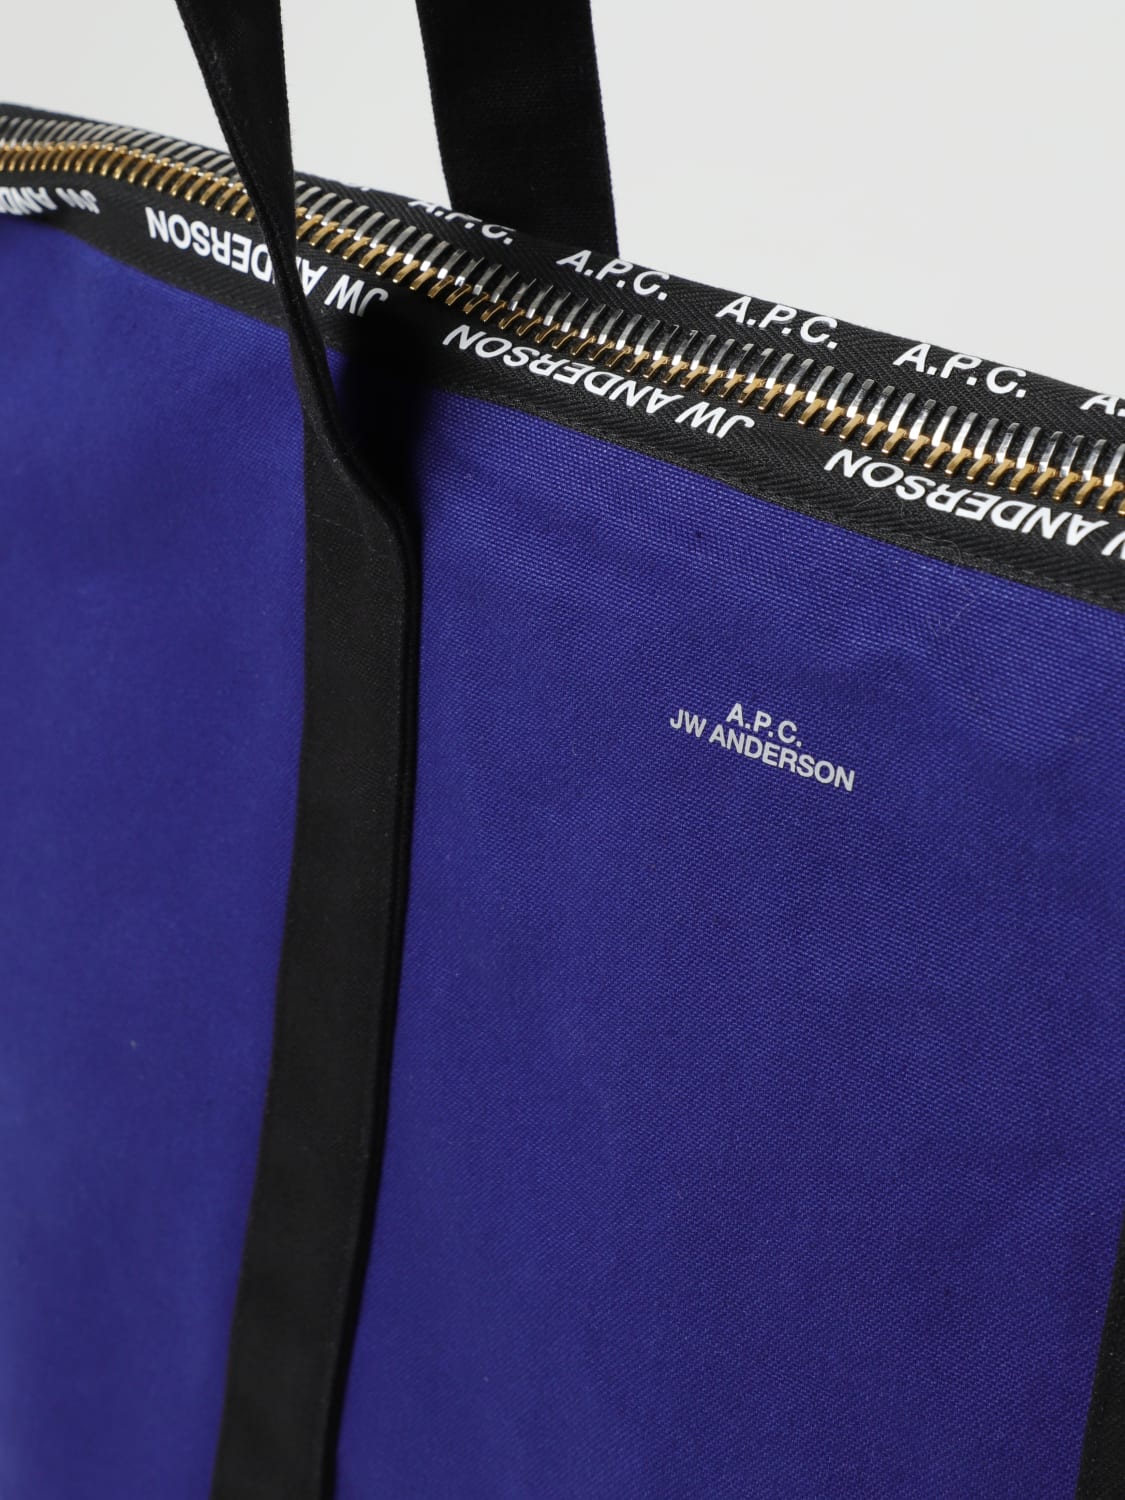 A.P.C. x JW Anderson Collaboration Release Info